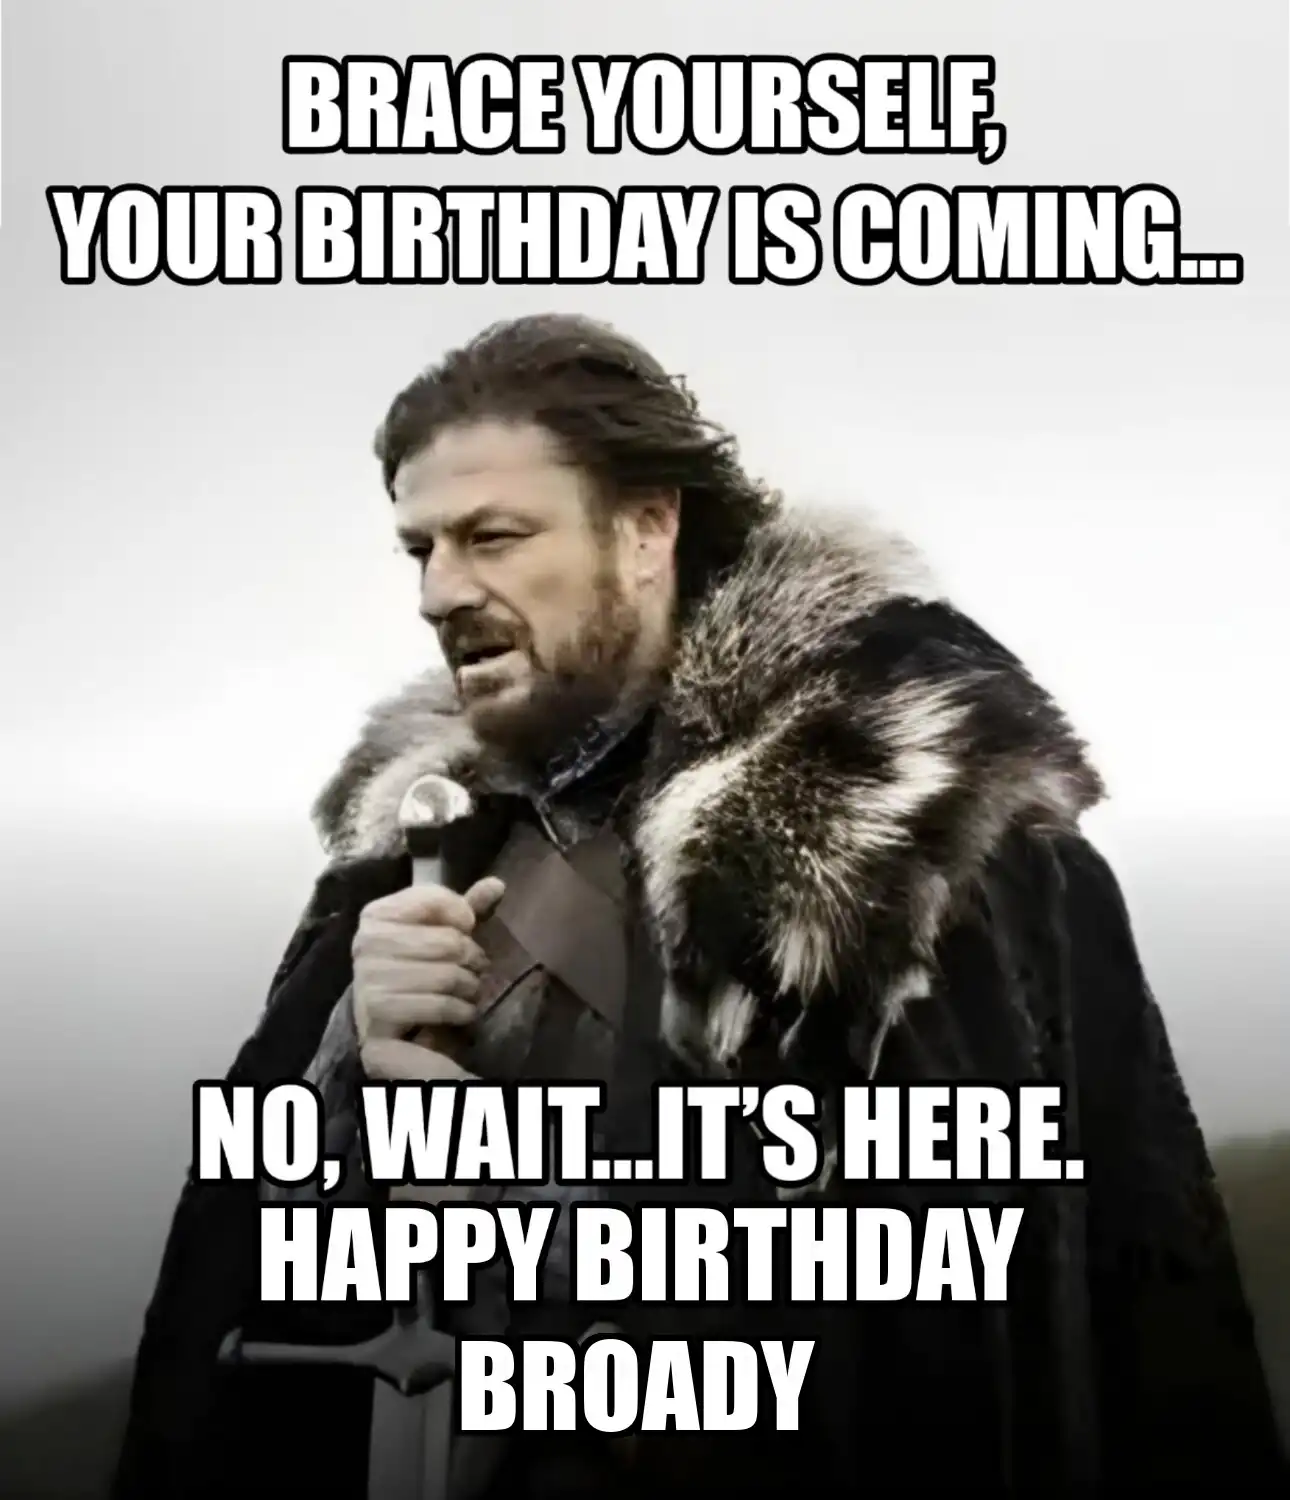 Happy Birthday Broady Brace Yourself Your Birthday Is Coming Meme